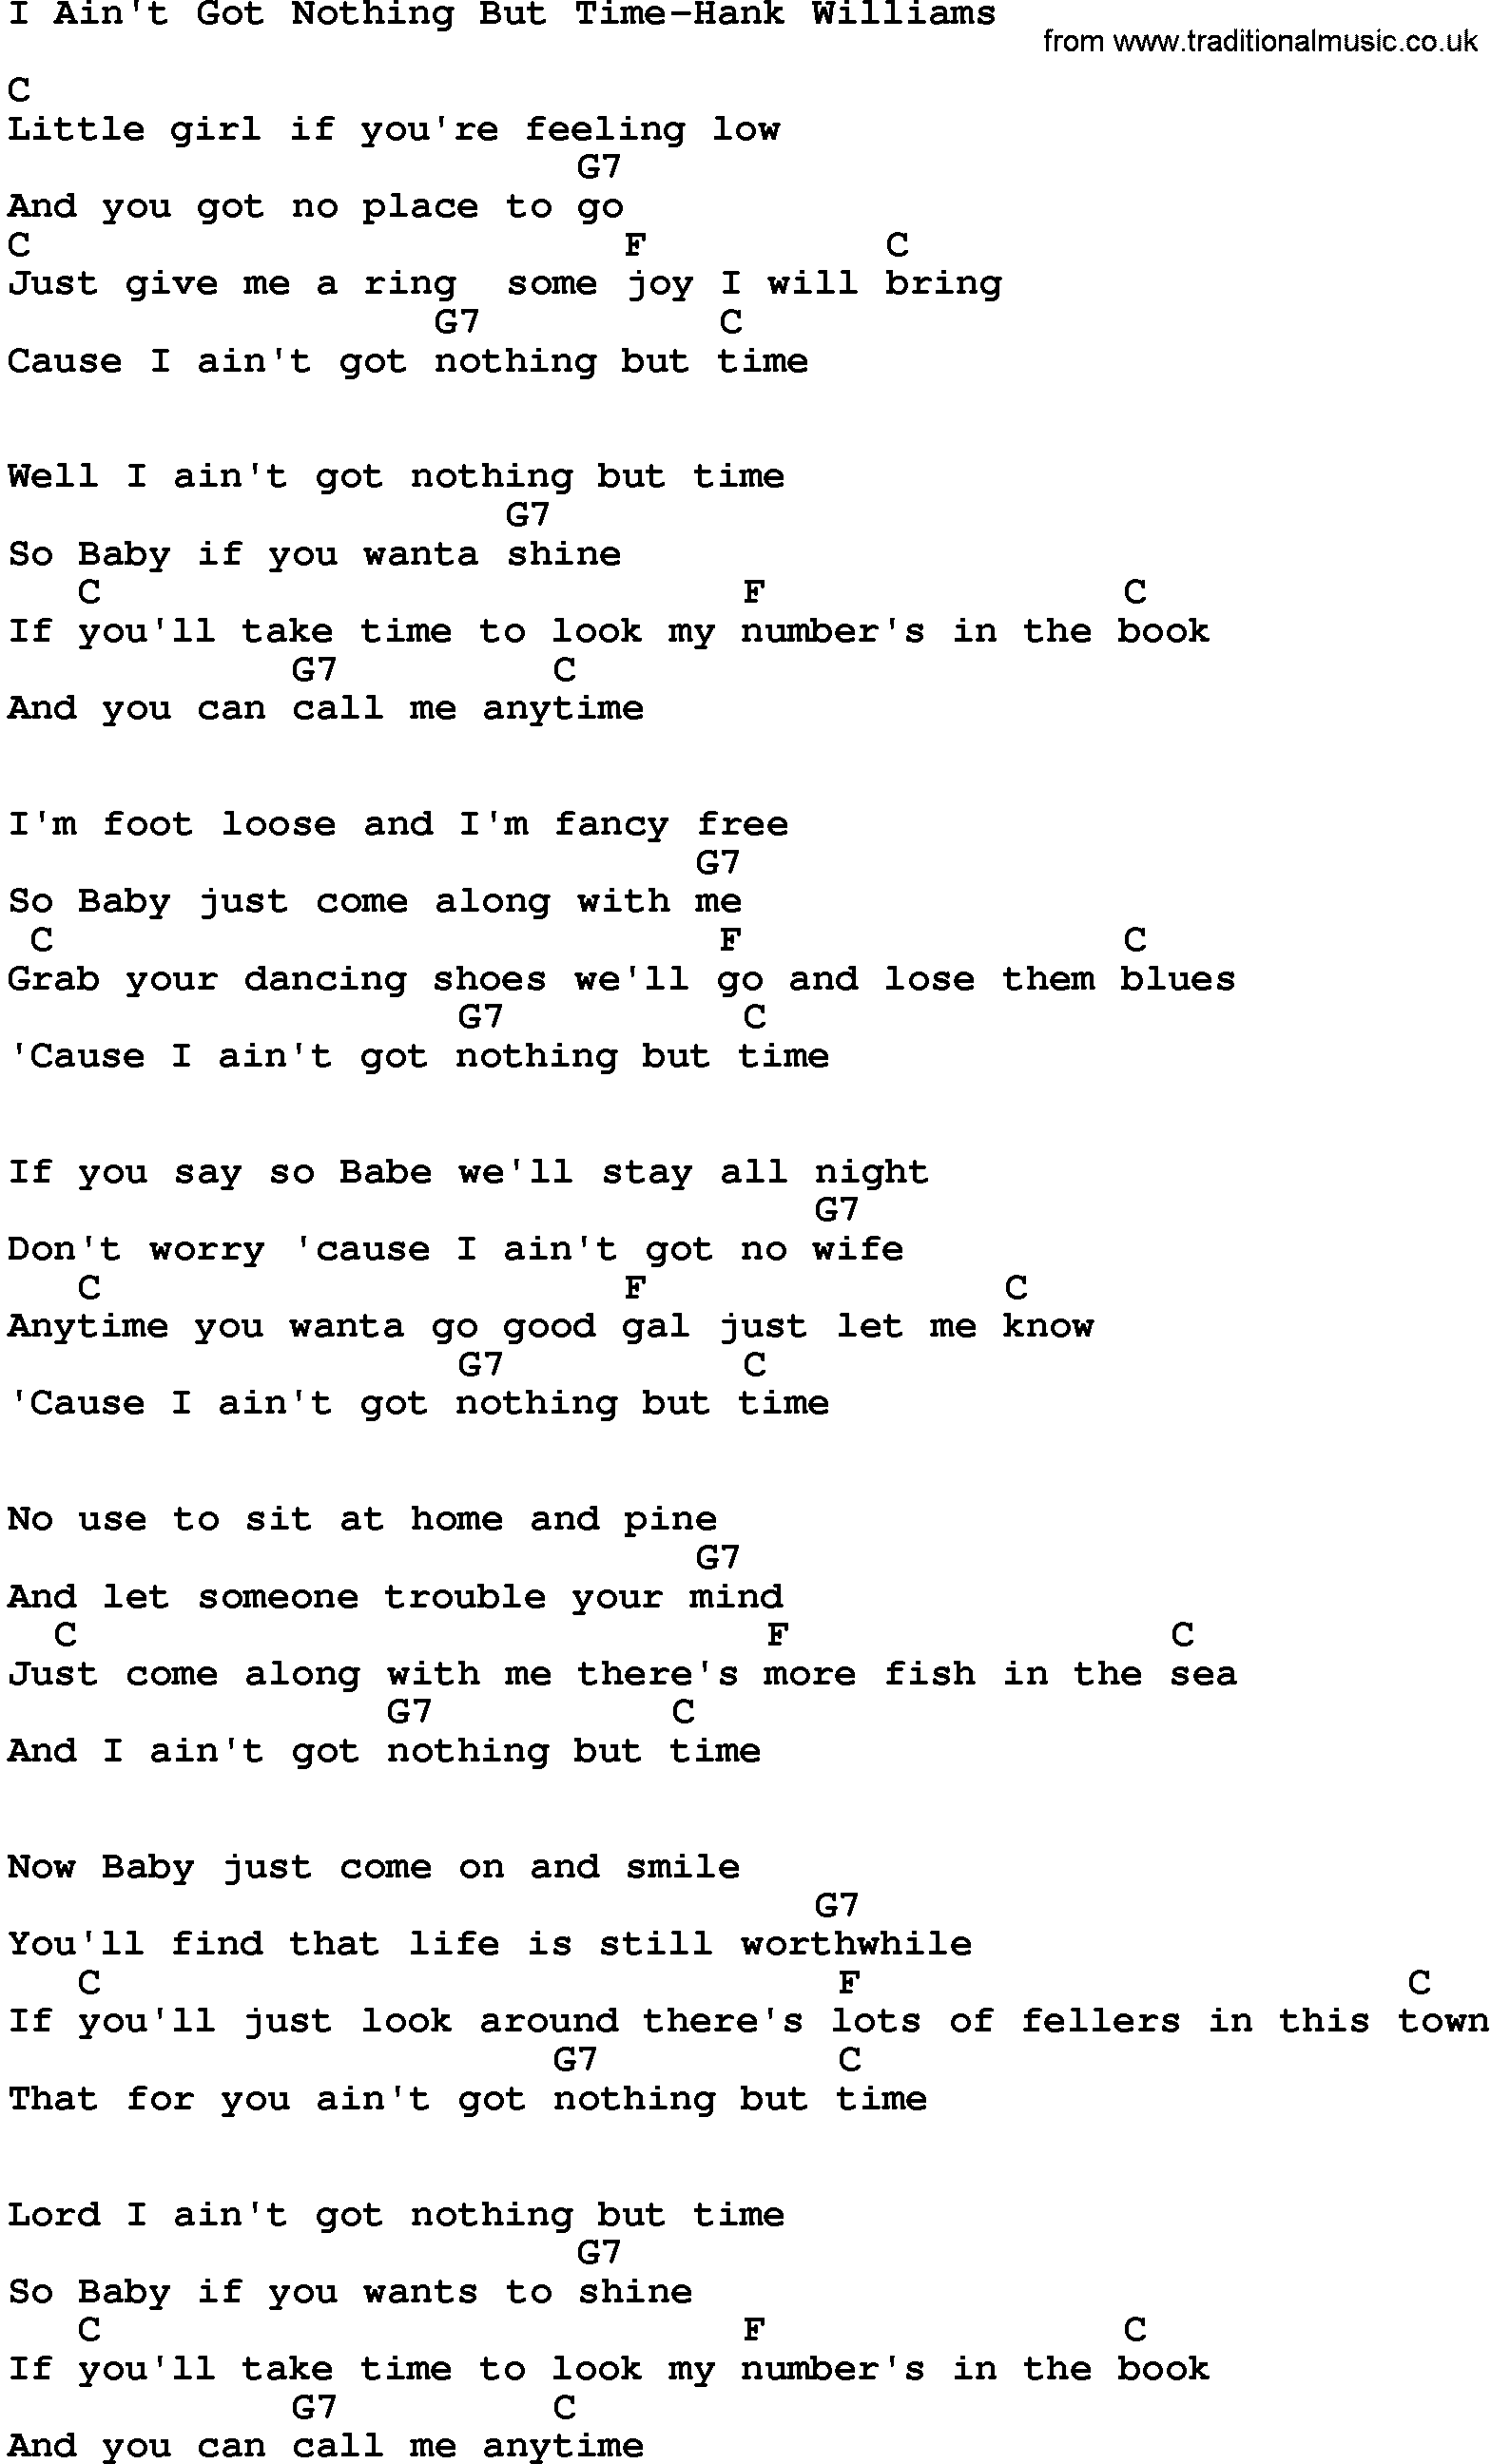 Country music song: I Ain't Got Nothing But Time-Hank Williams lyrics and chords